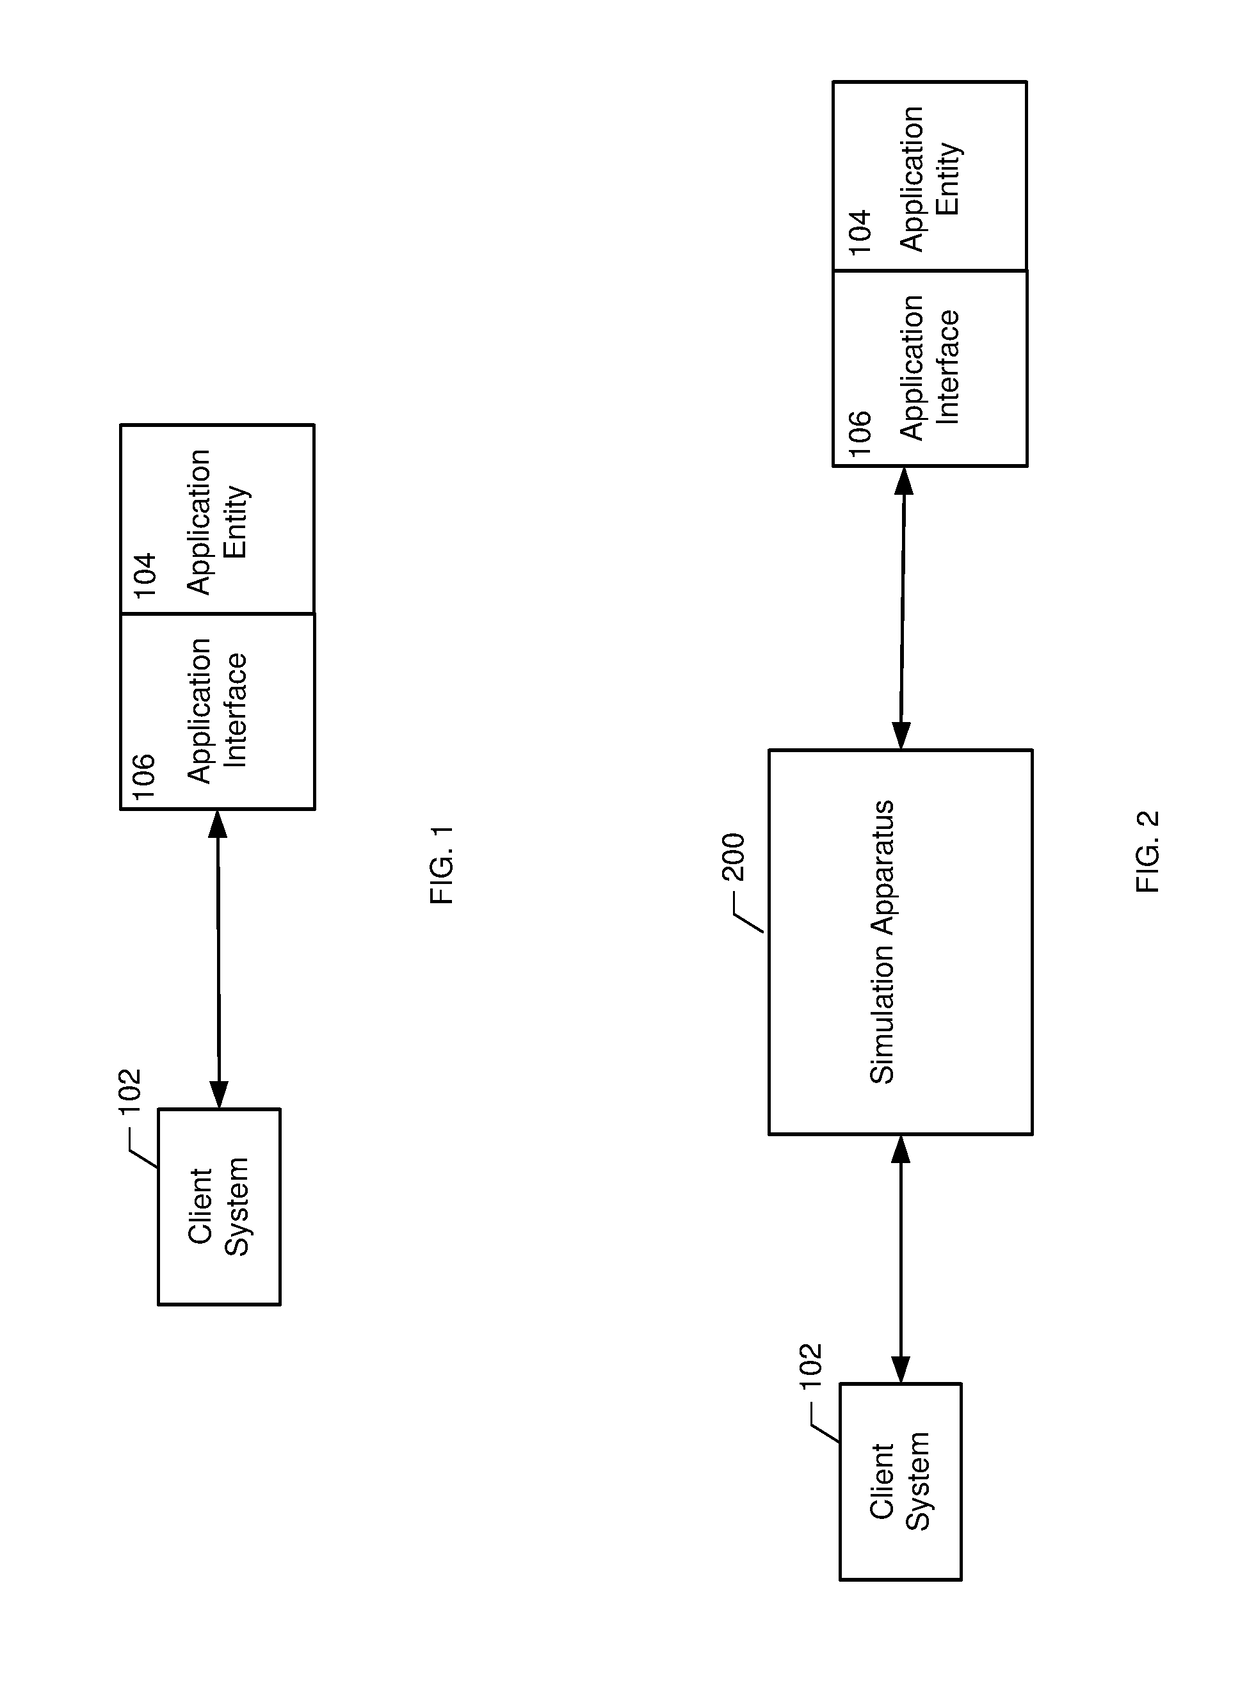 Method, apparatus, and computer program product for simulating client and application interface integration